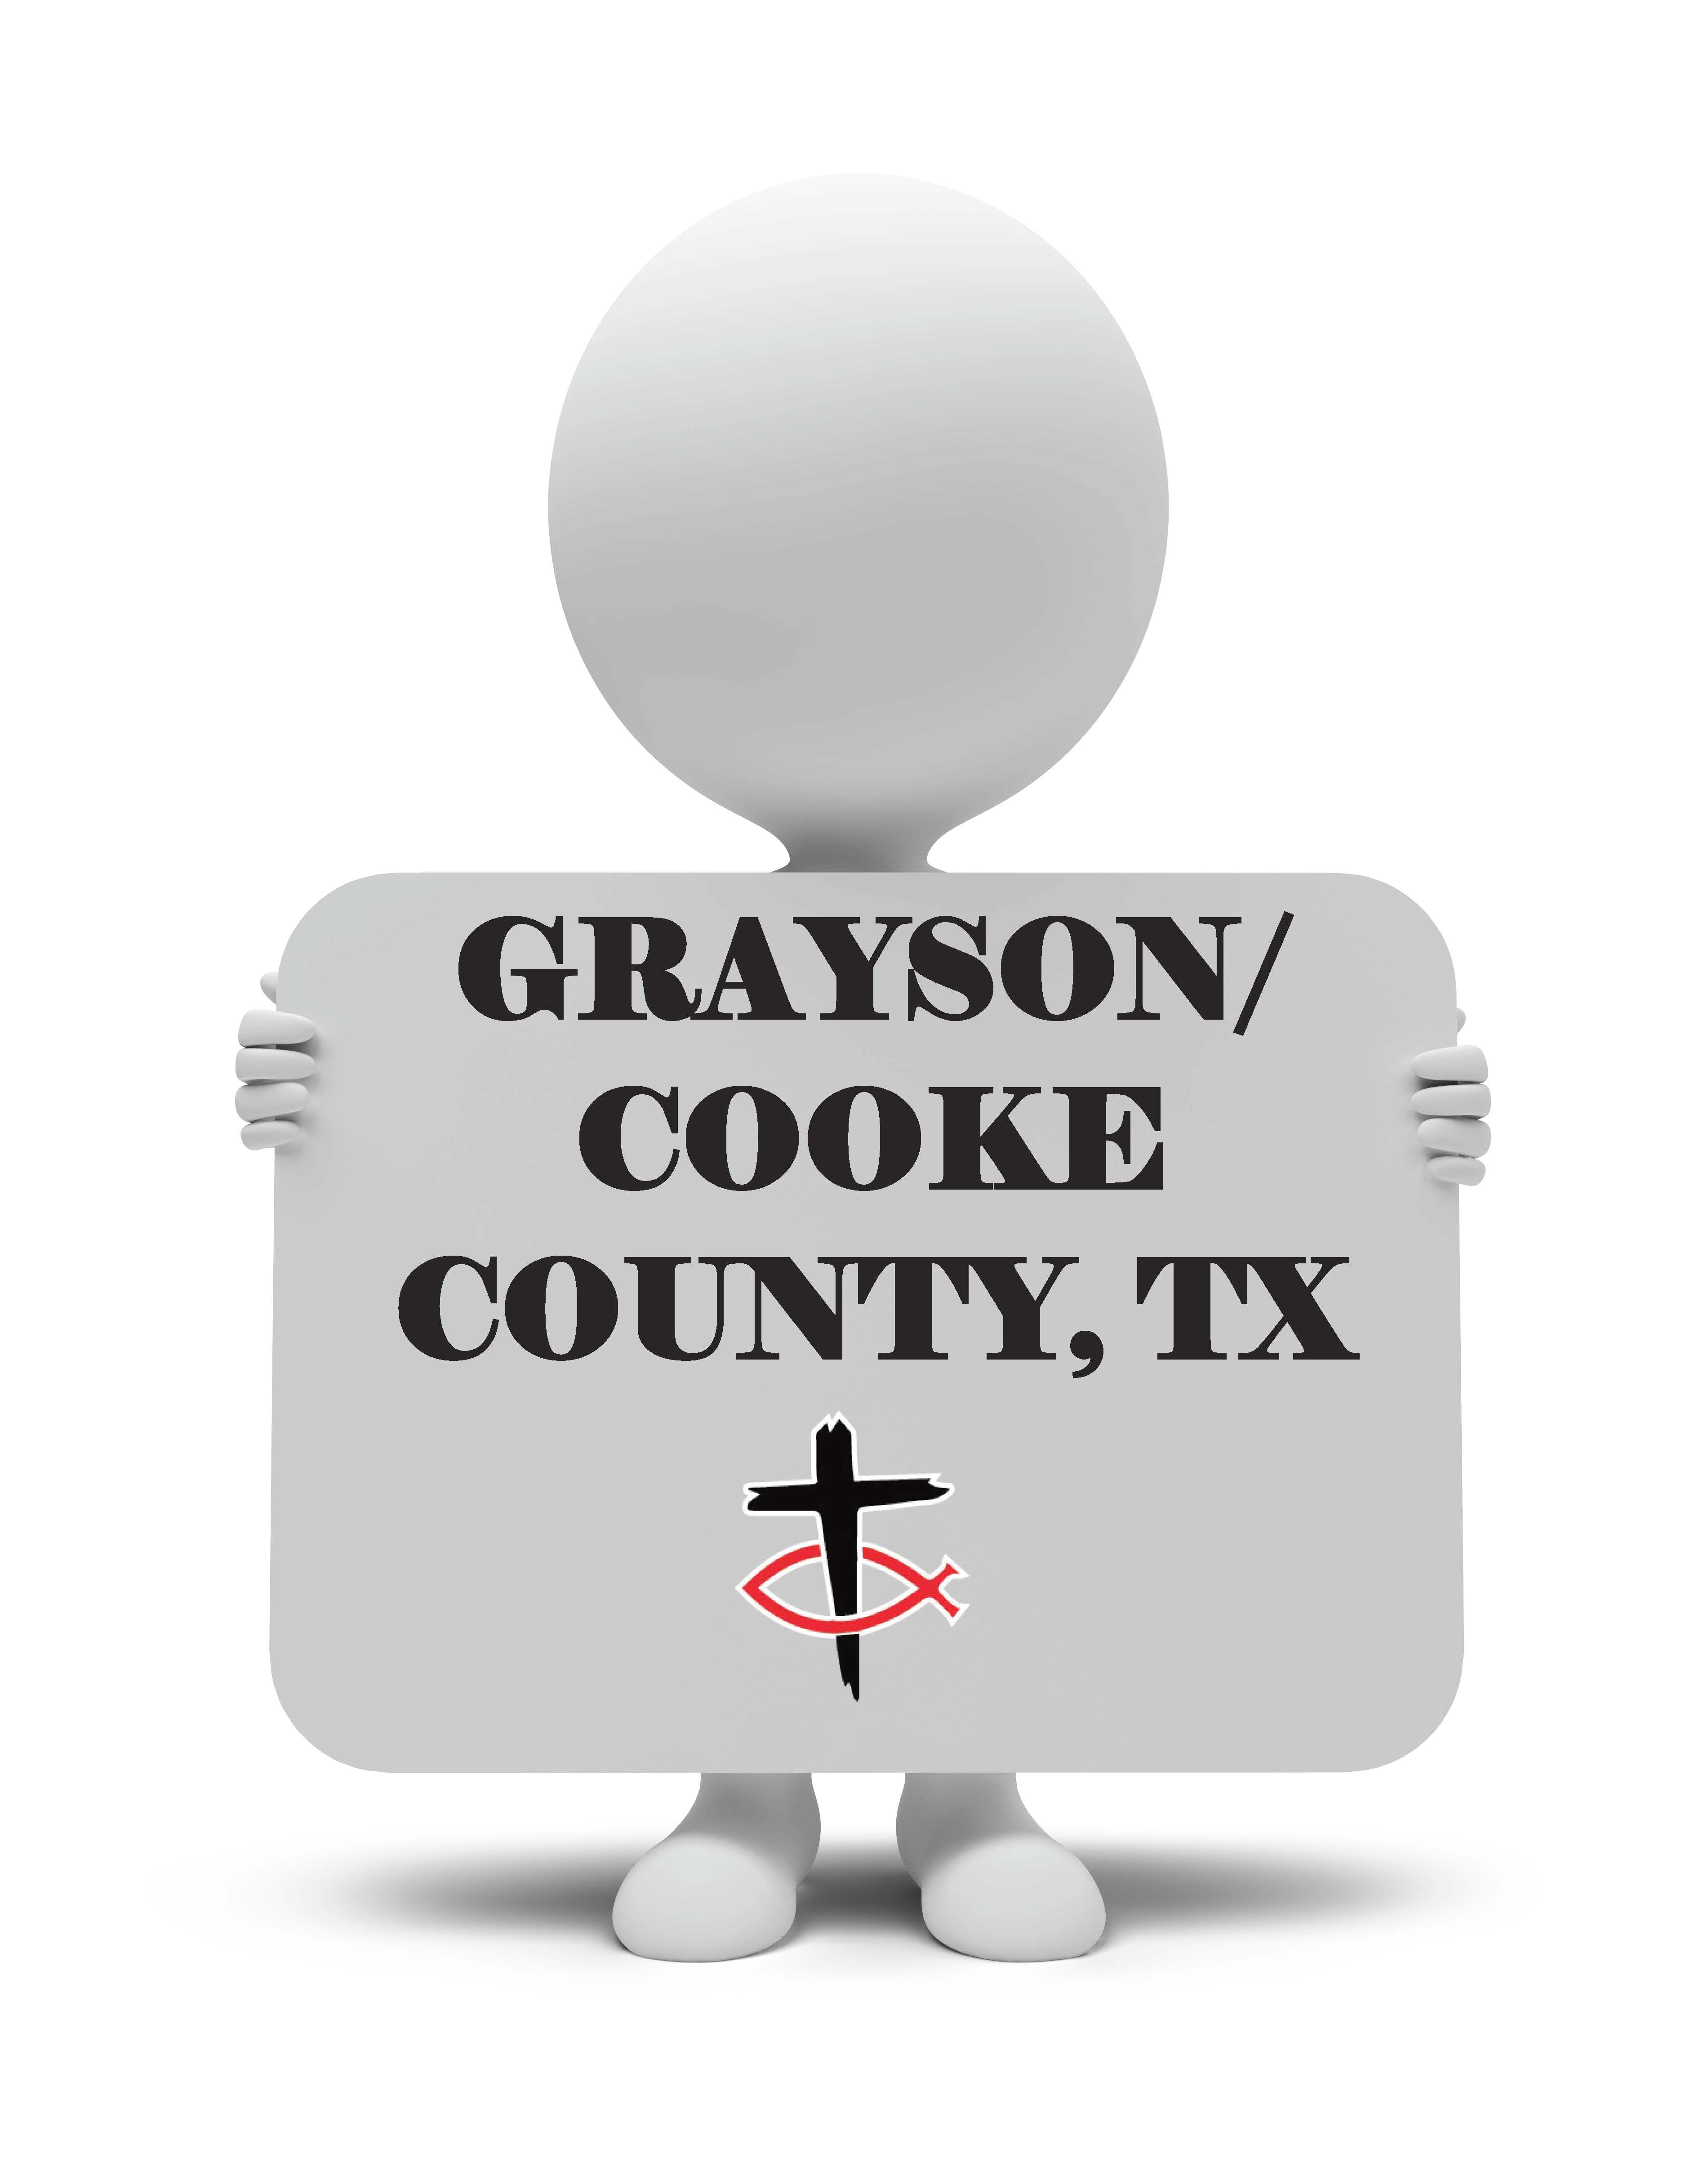 pick up the christian business print guide in grayson cooke county tx